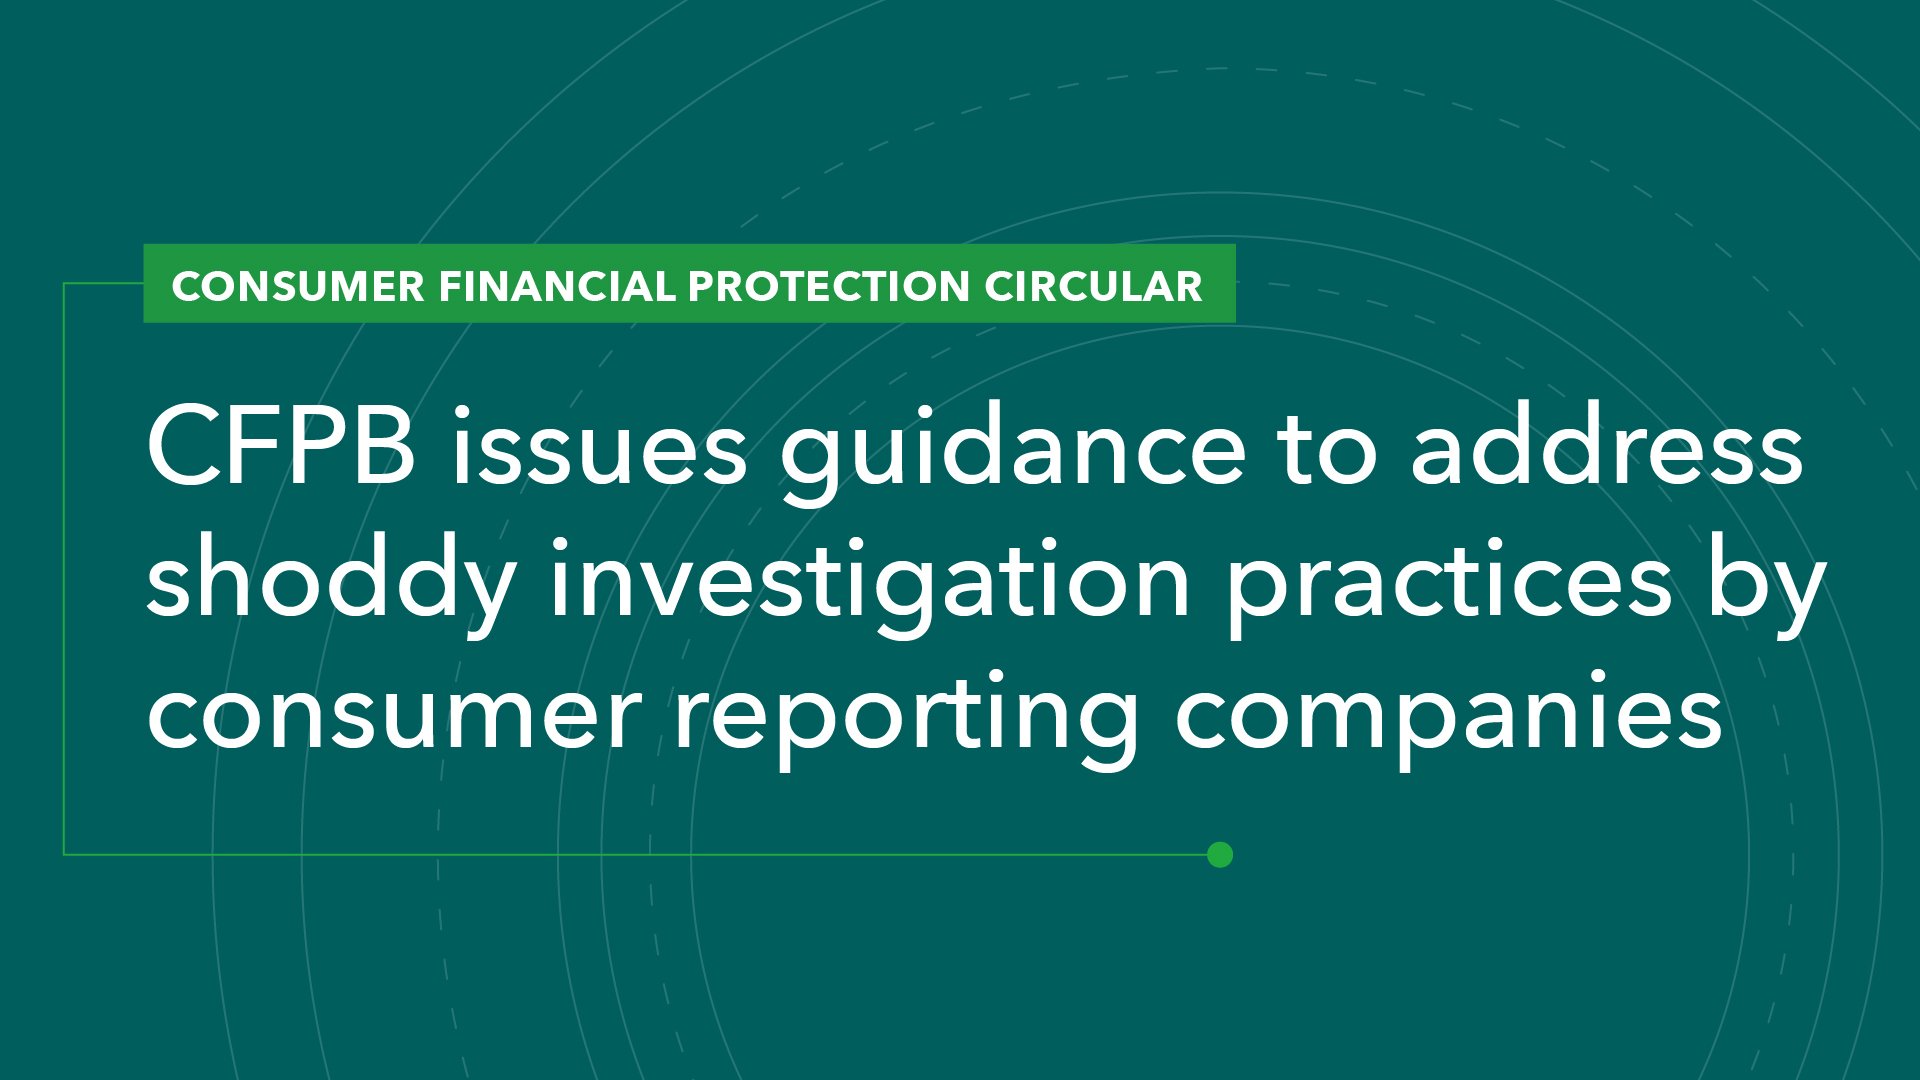 CFPB Issues Guidance to Address Shoddy Investigation Practices by Consumer Reporting Companies